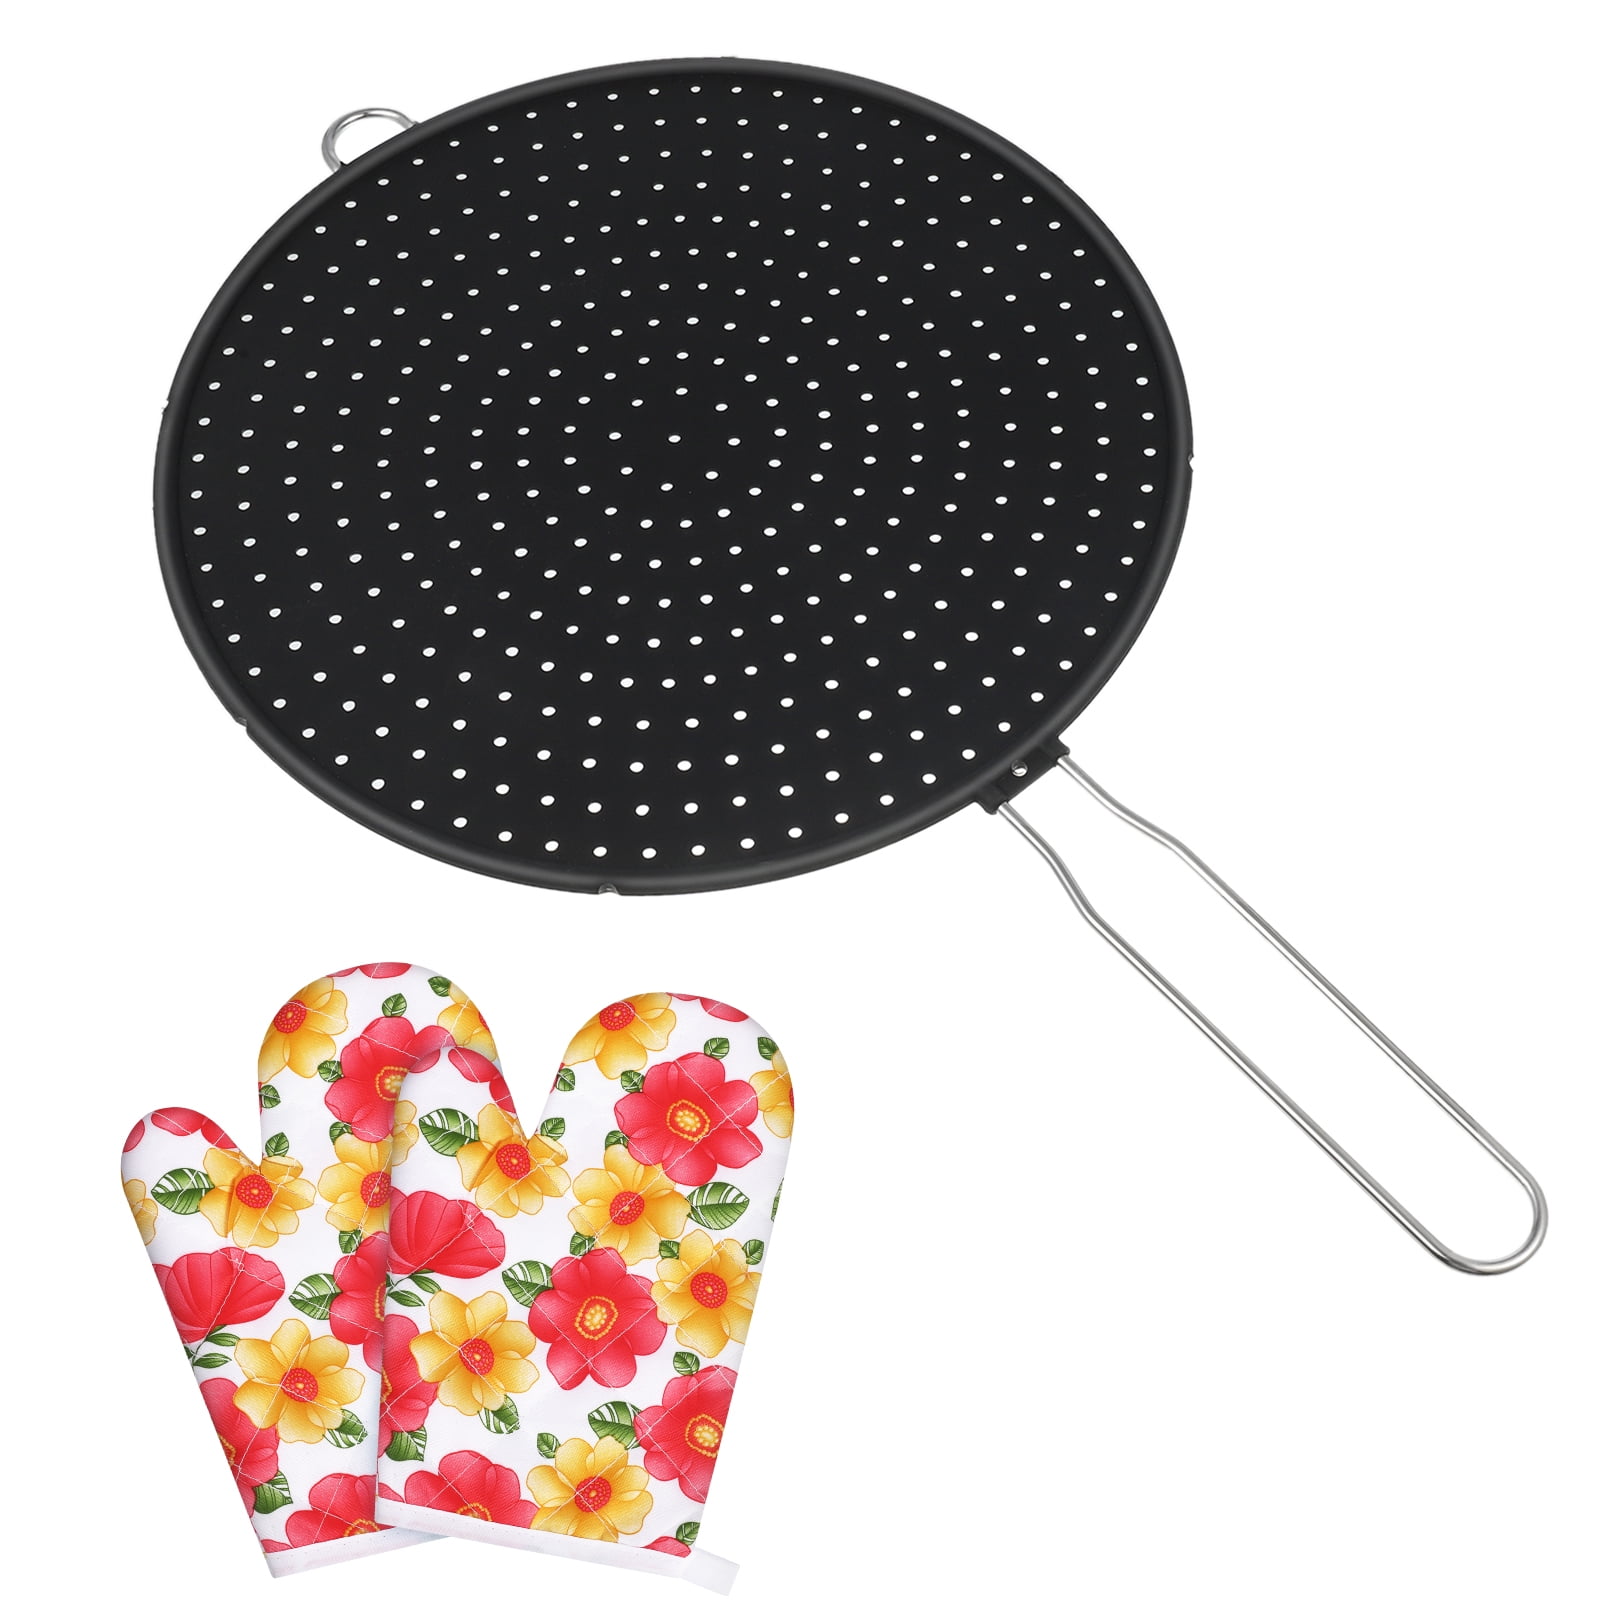 13 Silicone Splatter Screen for Frying Pan,Casewin Multi-Use Universal Pan  Cover, Non-Stick Oil Splash Guard, Cooling Mat, Drain Board, Strainer, Food  Safety, High Heat Resistant, Black 